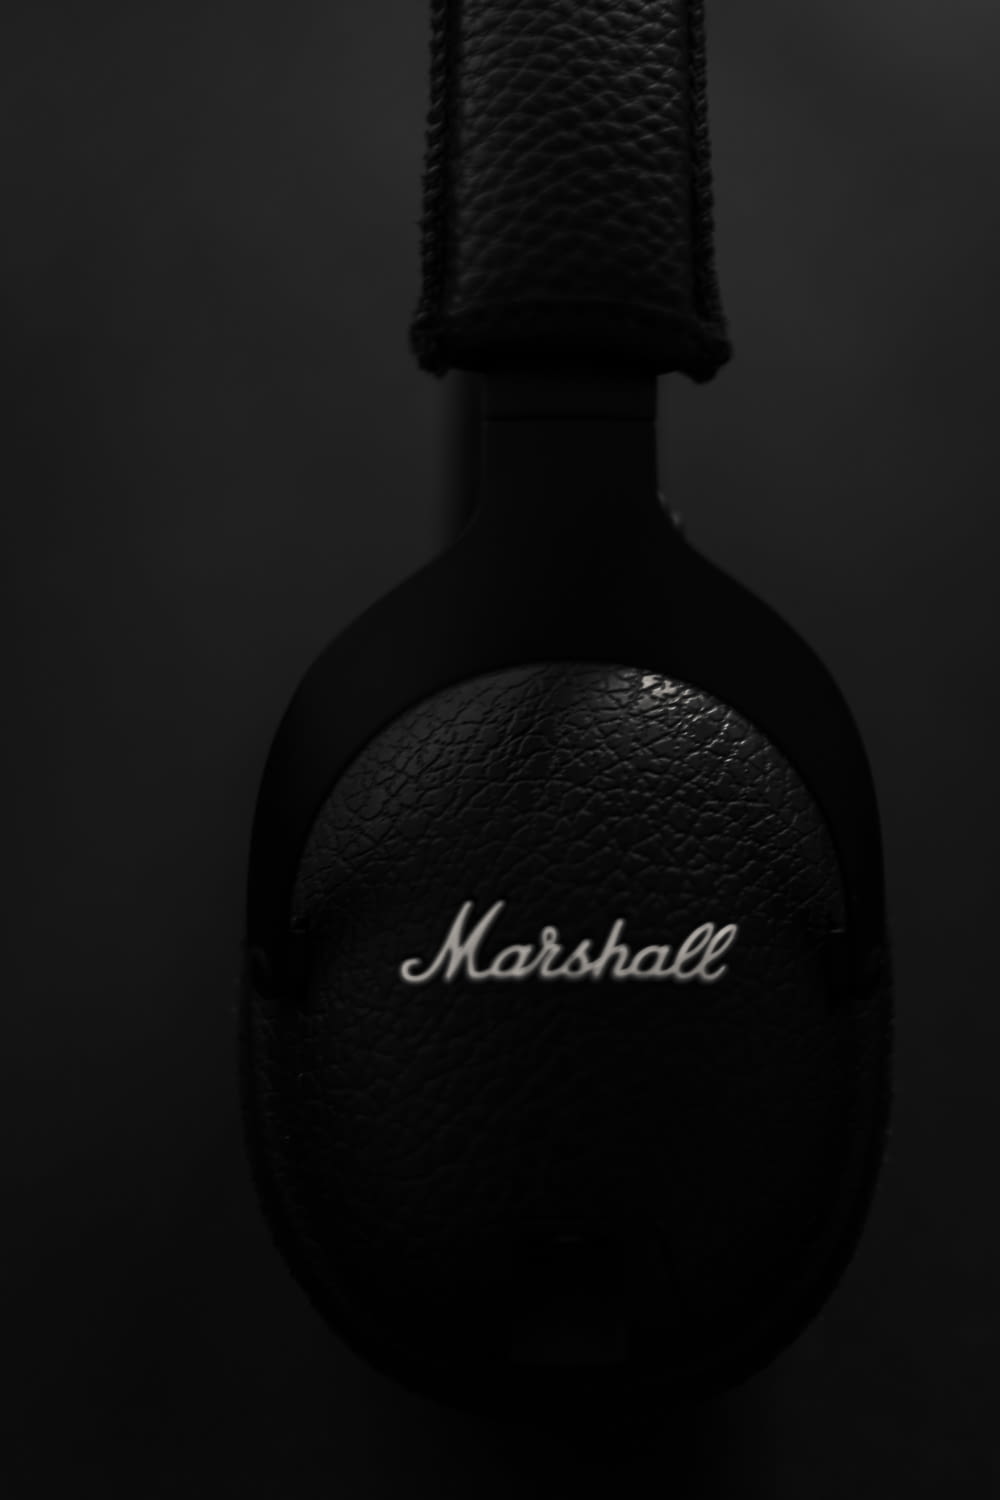 a pair of headphones with the word marshall written on it